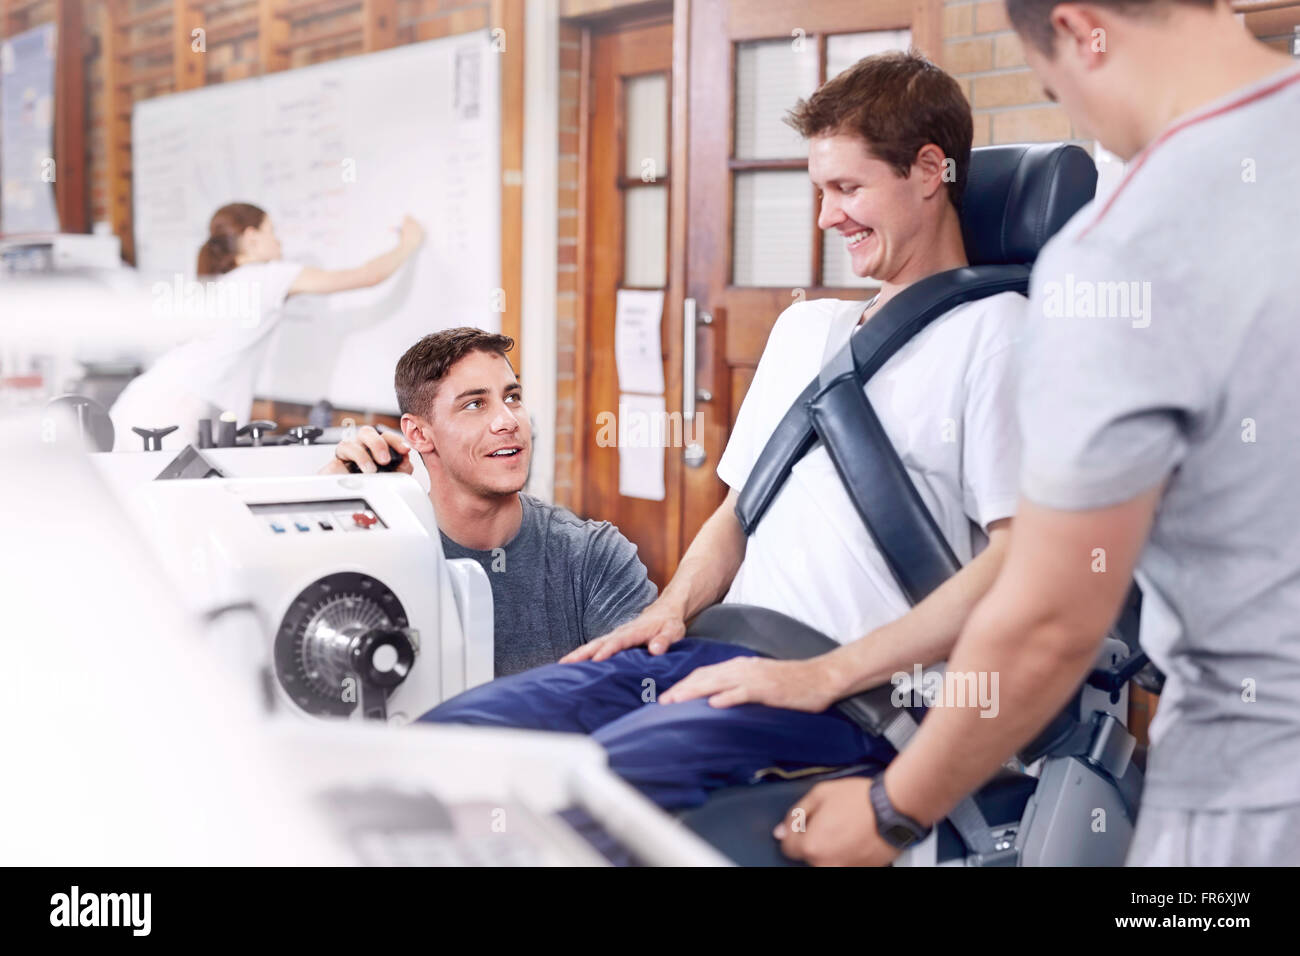 Physical therapists guiding man at machinery Stock Photo